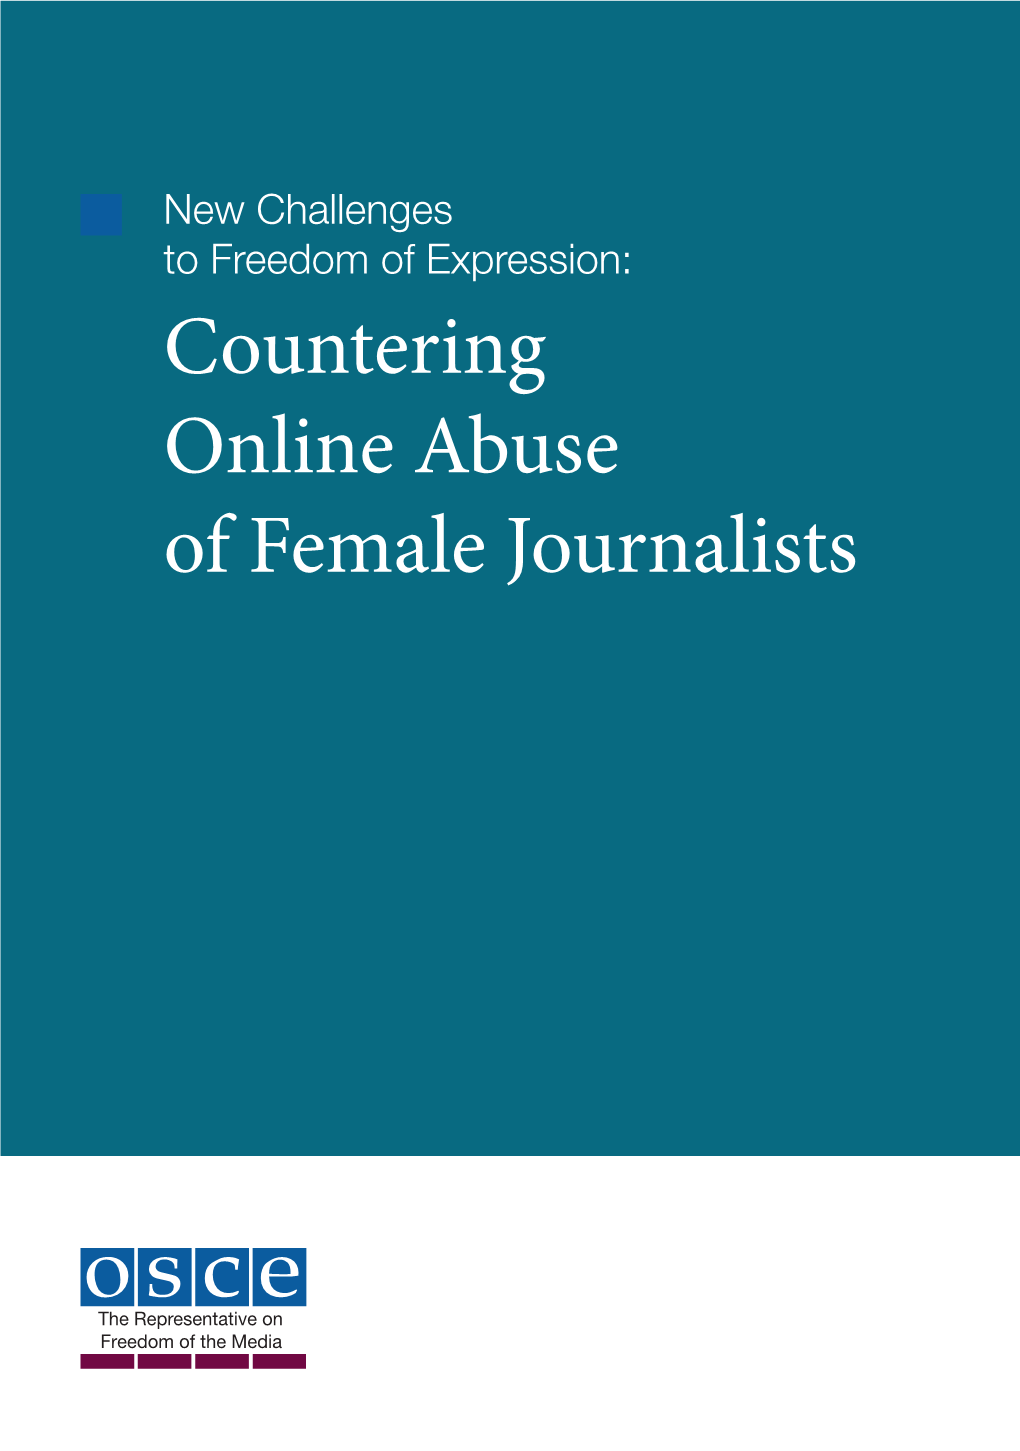 Countering Online Abuse of Female Journalists